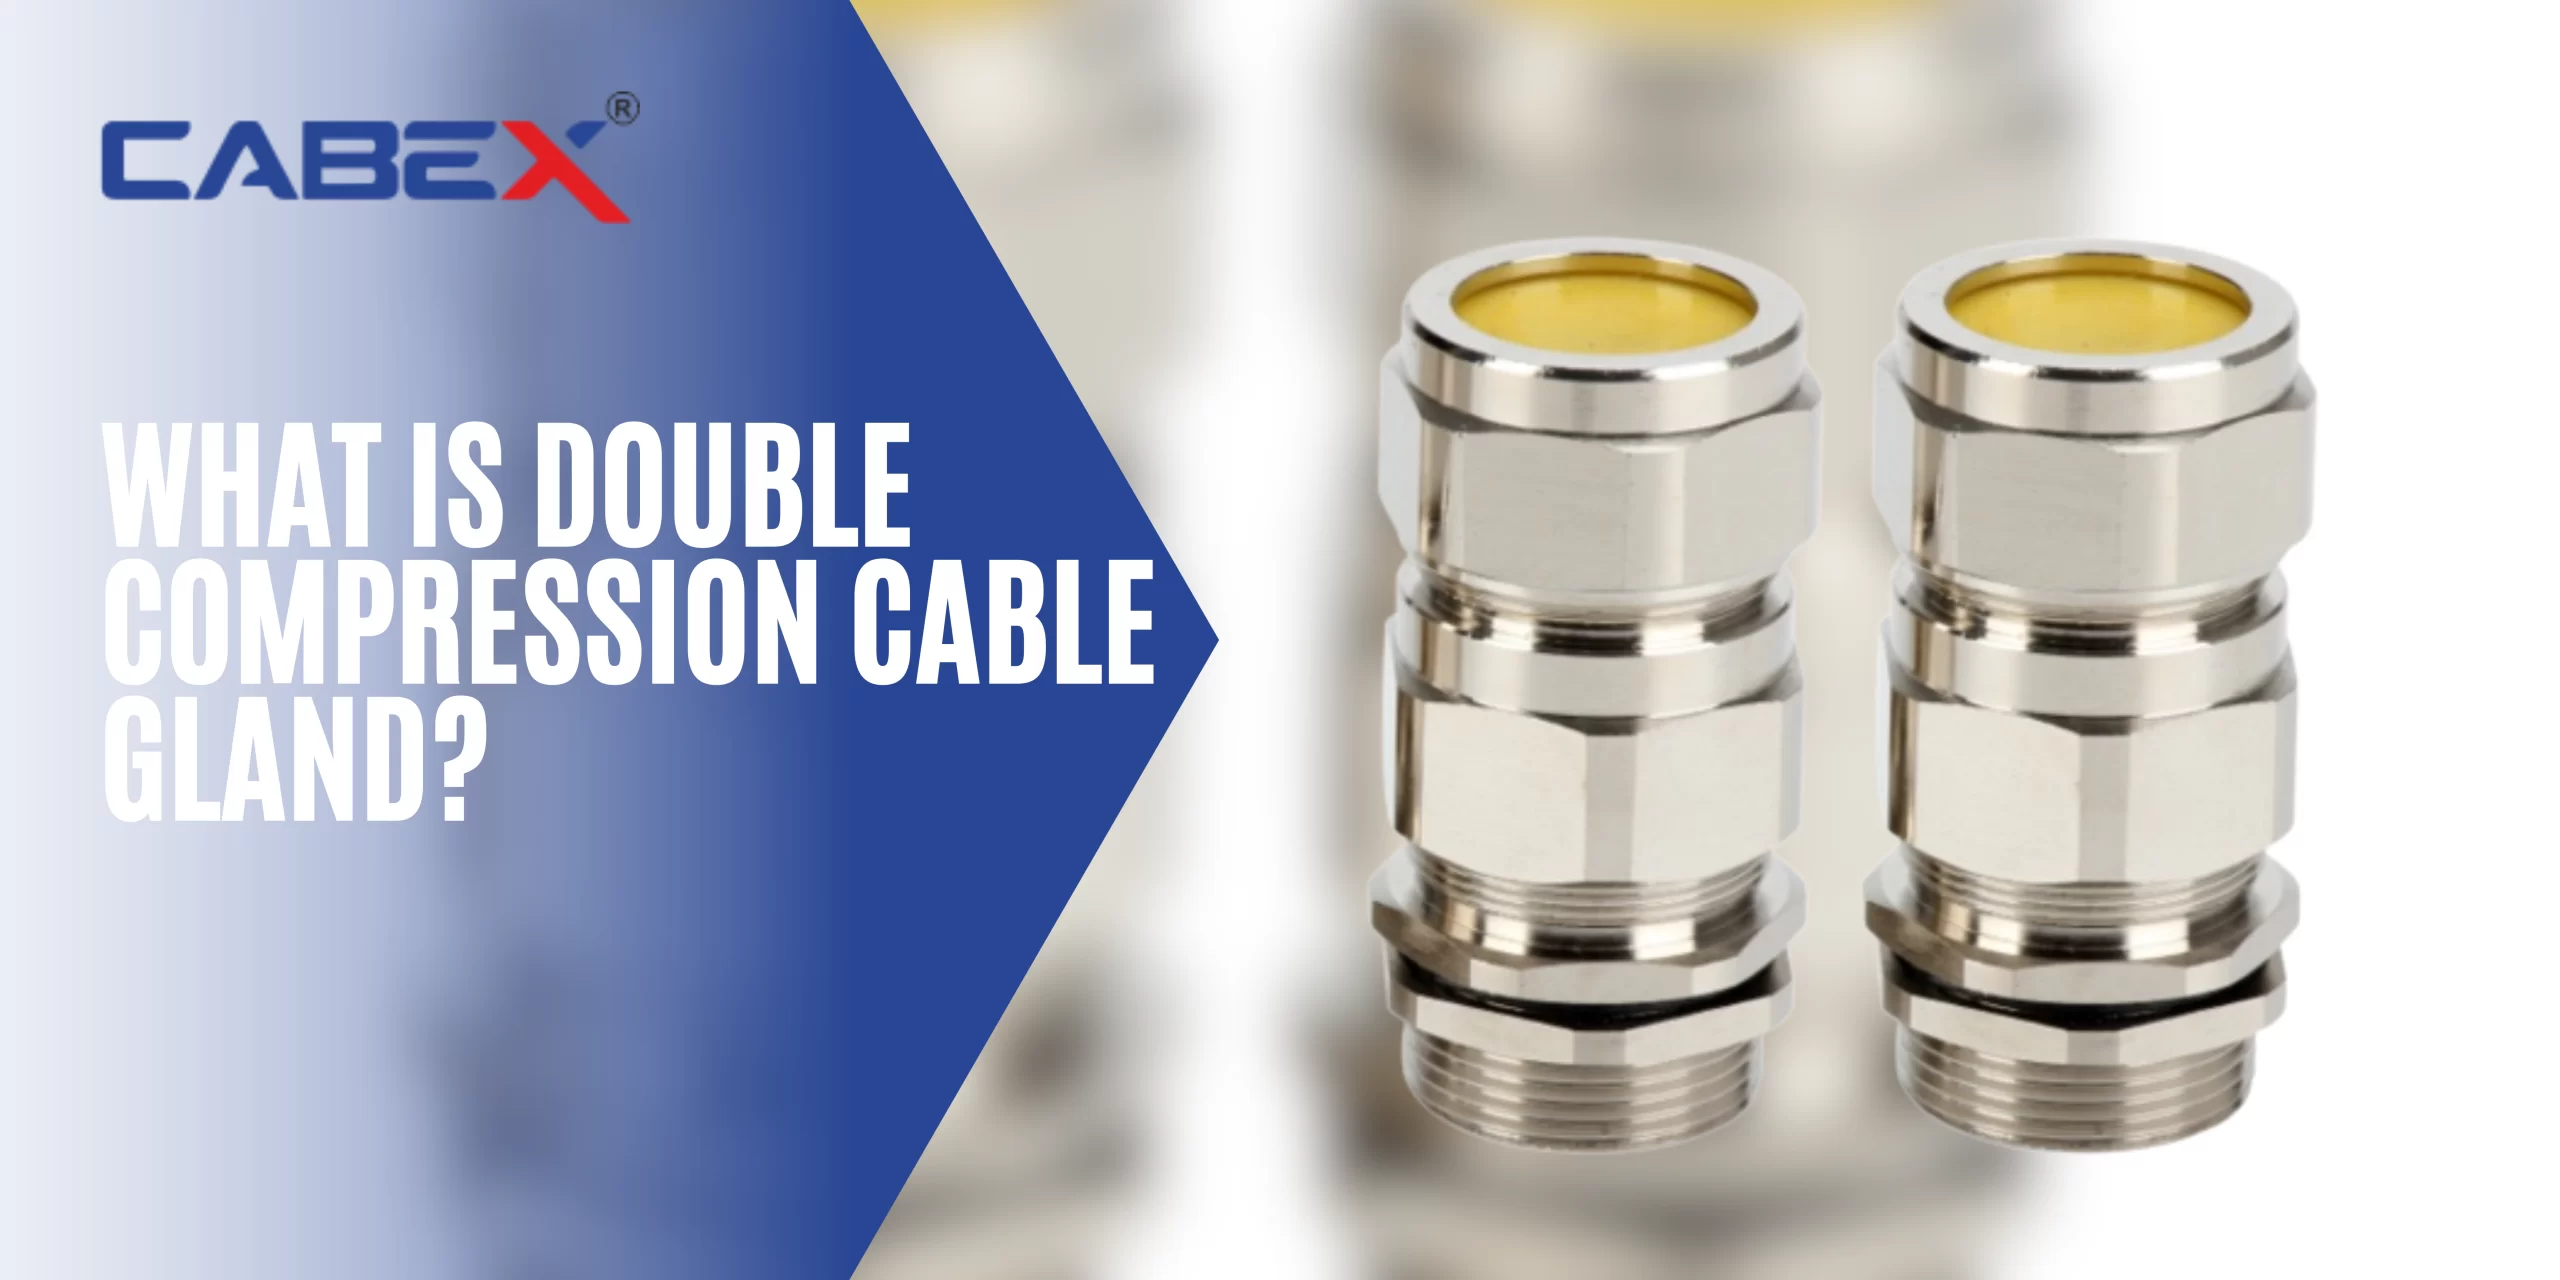 Double compression cable gland parts name and installation guide